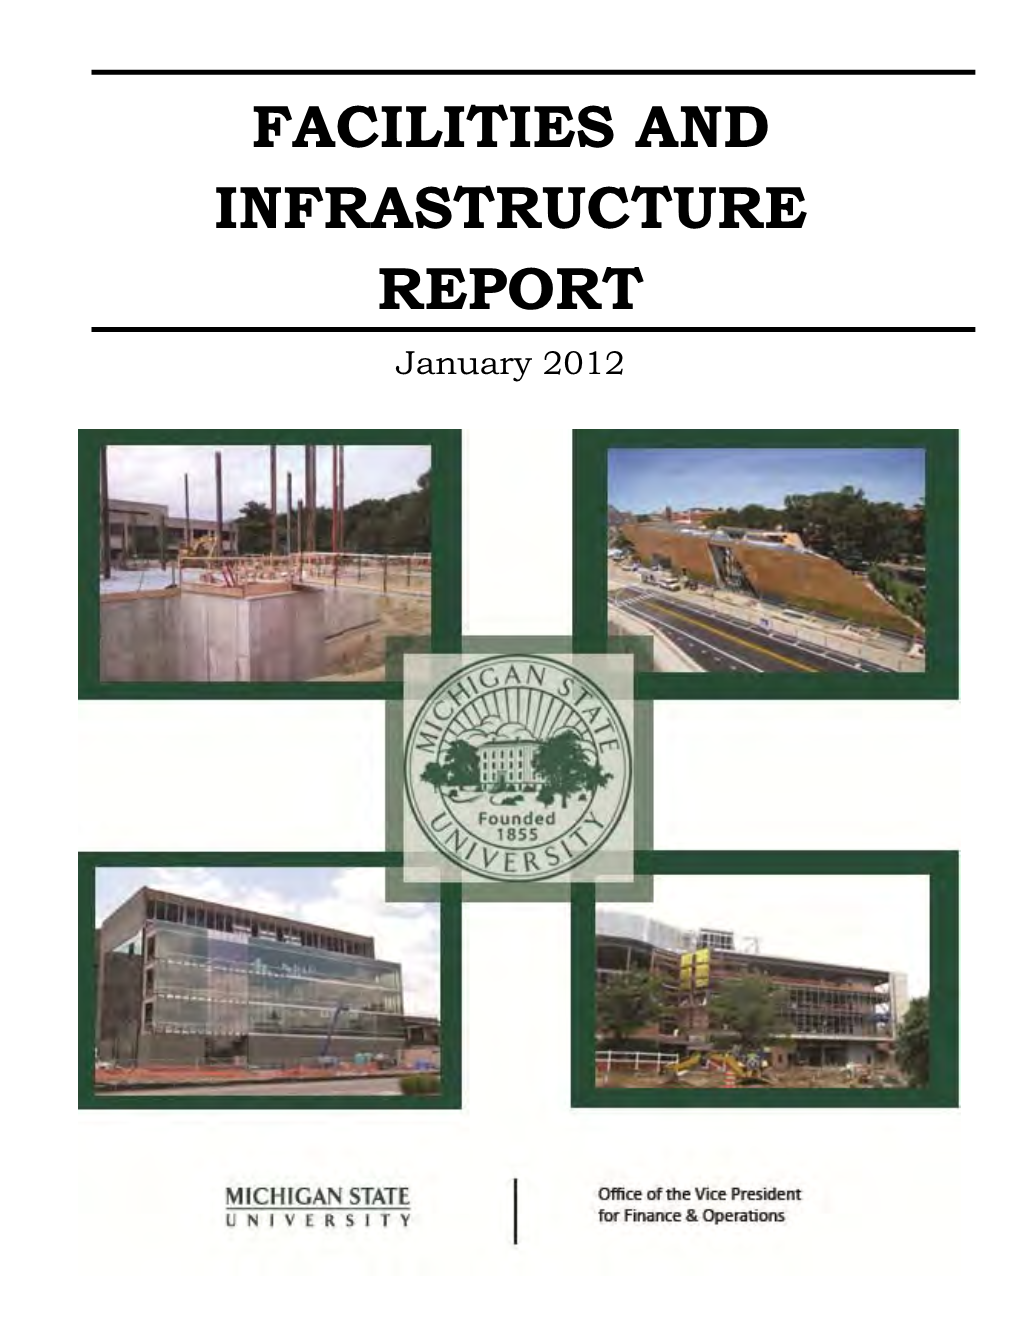 Michigan State Facilities & Infrastructure Report 2012